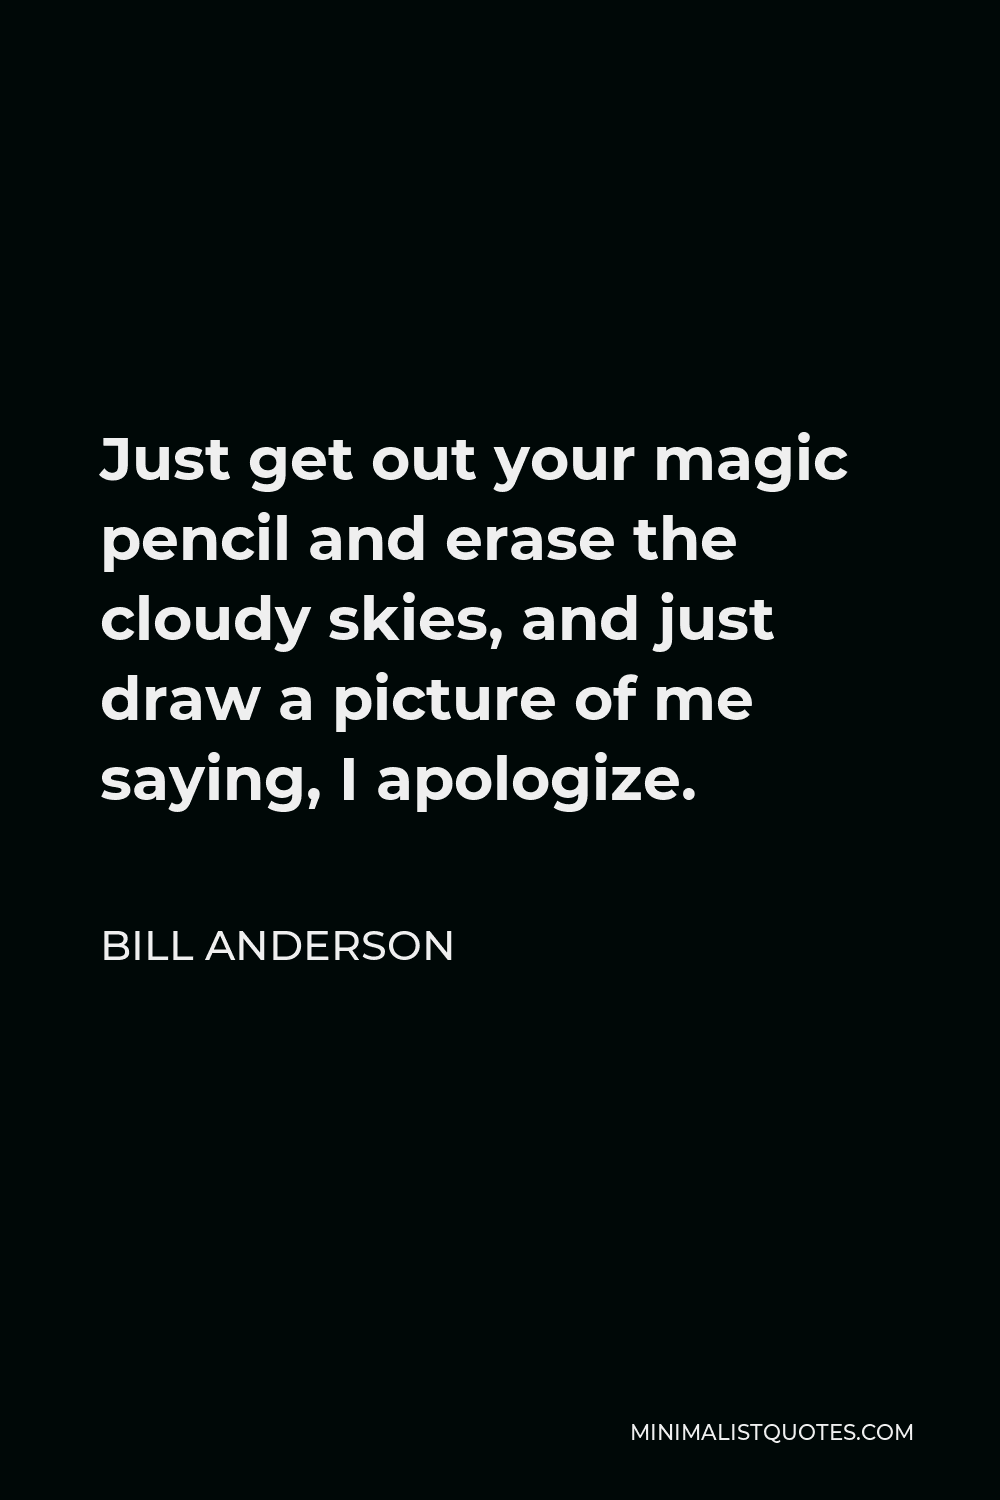 Bill Anderson Quote - Just get out your magic pencil and erase the cloudy skies, and just draw a picture of me saying, I apologize.